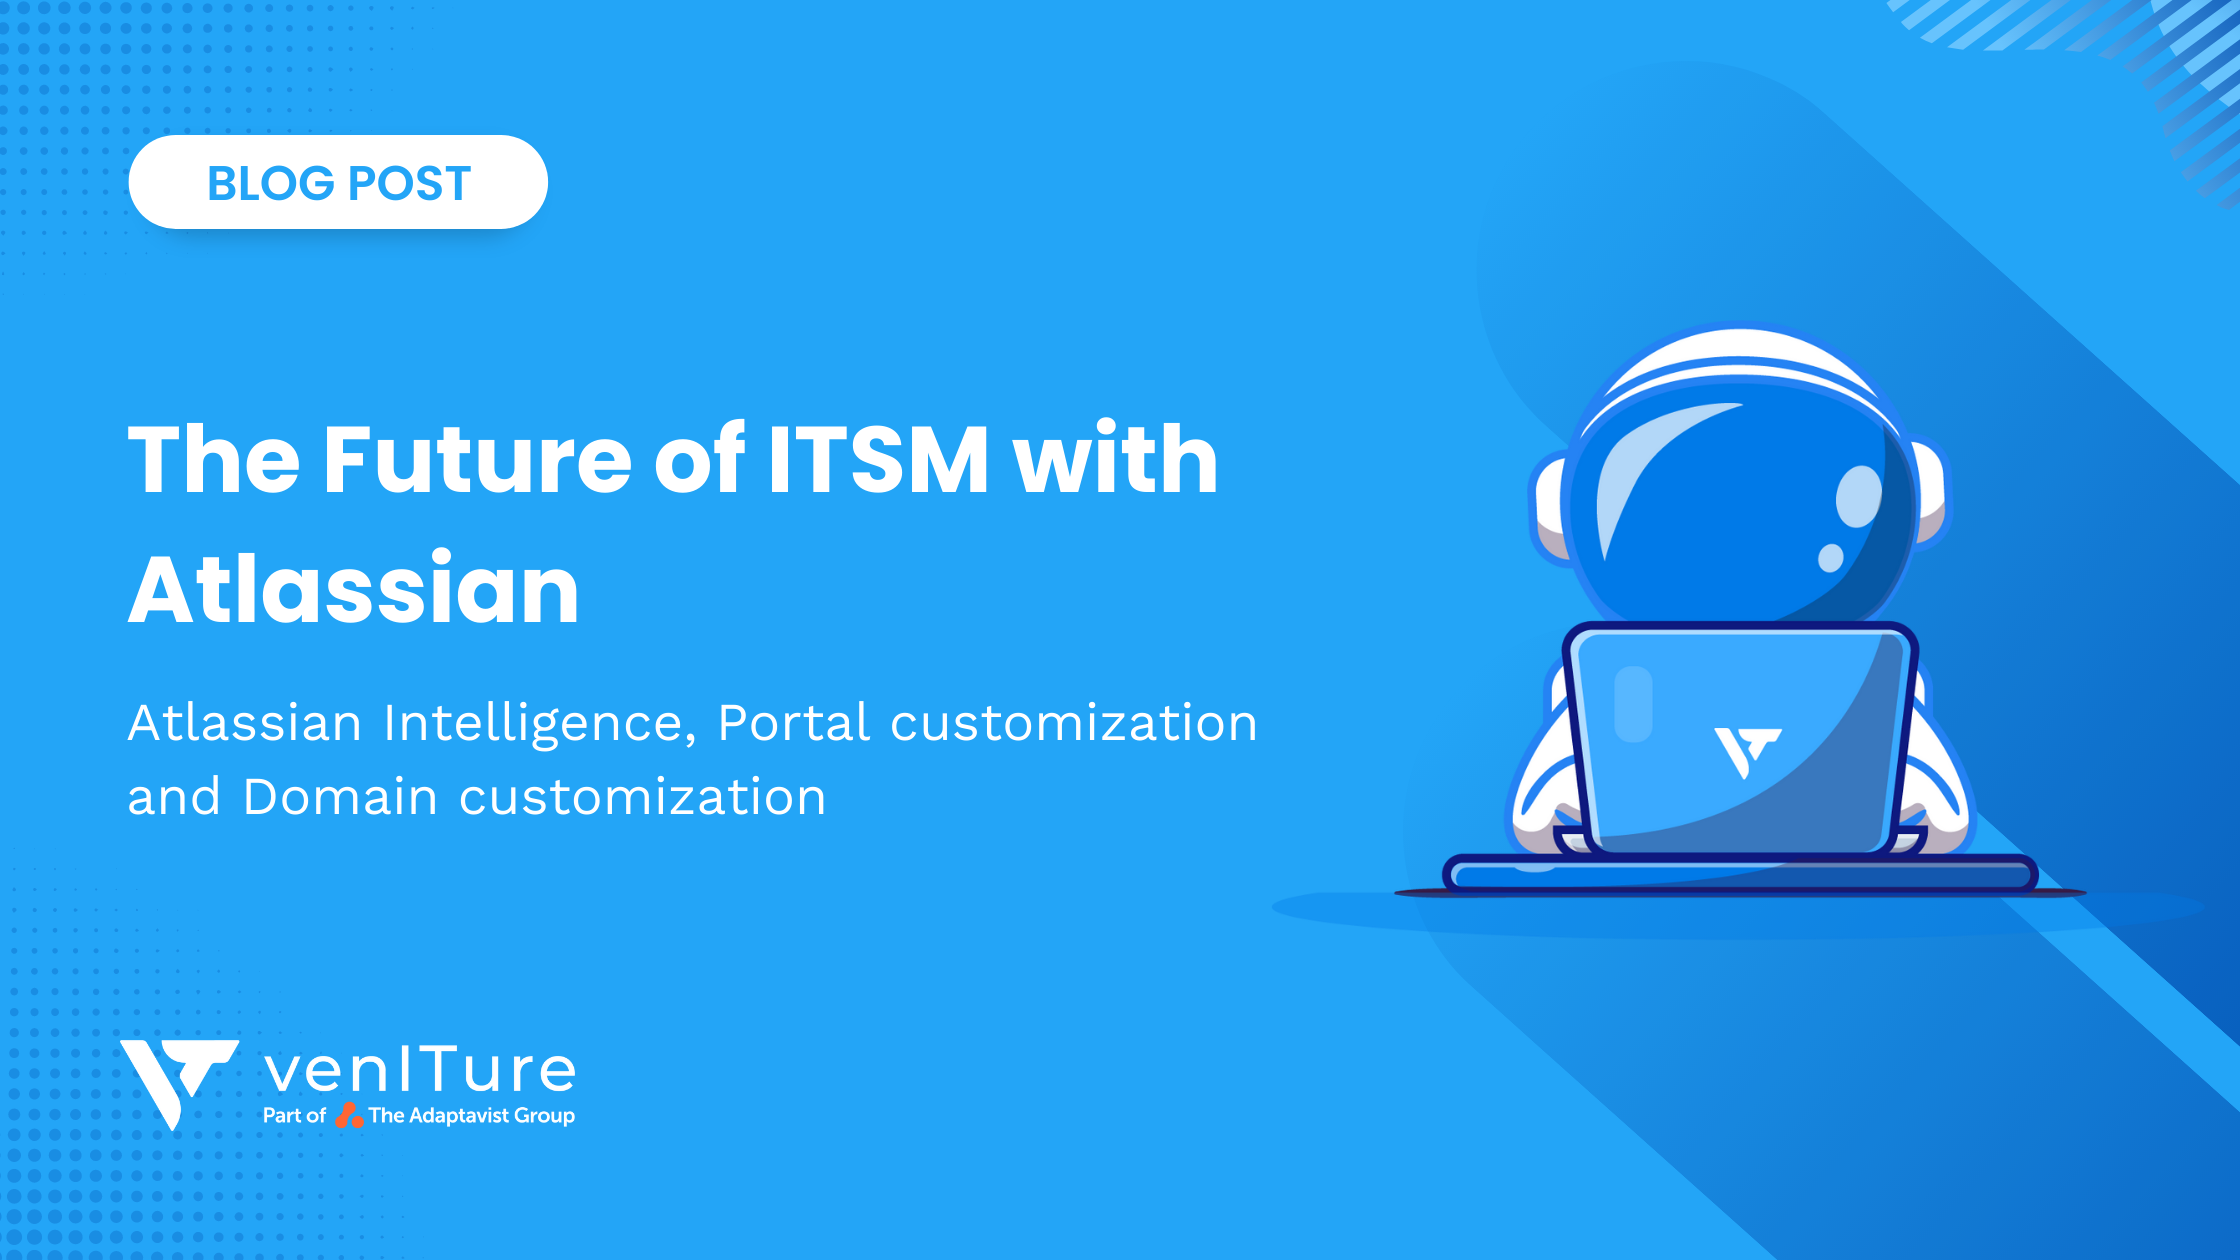 The Future of ITSM with Atlassian